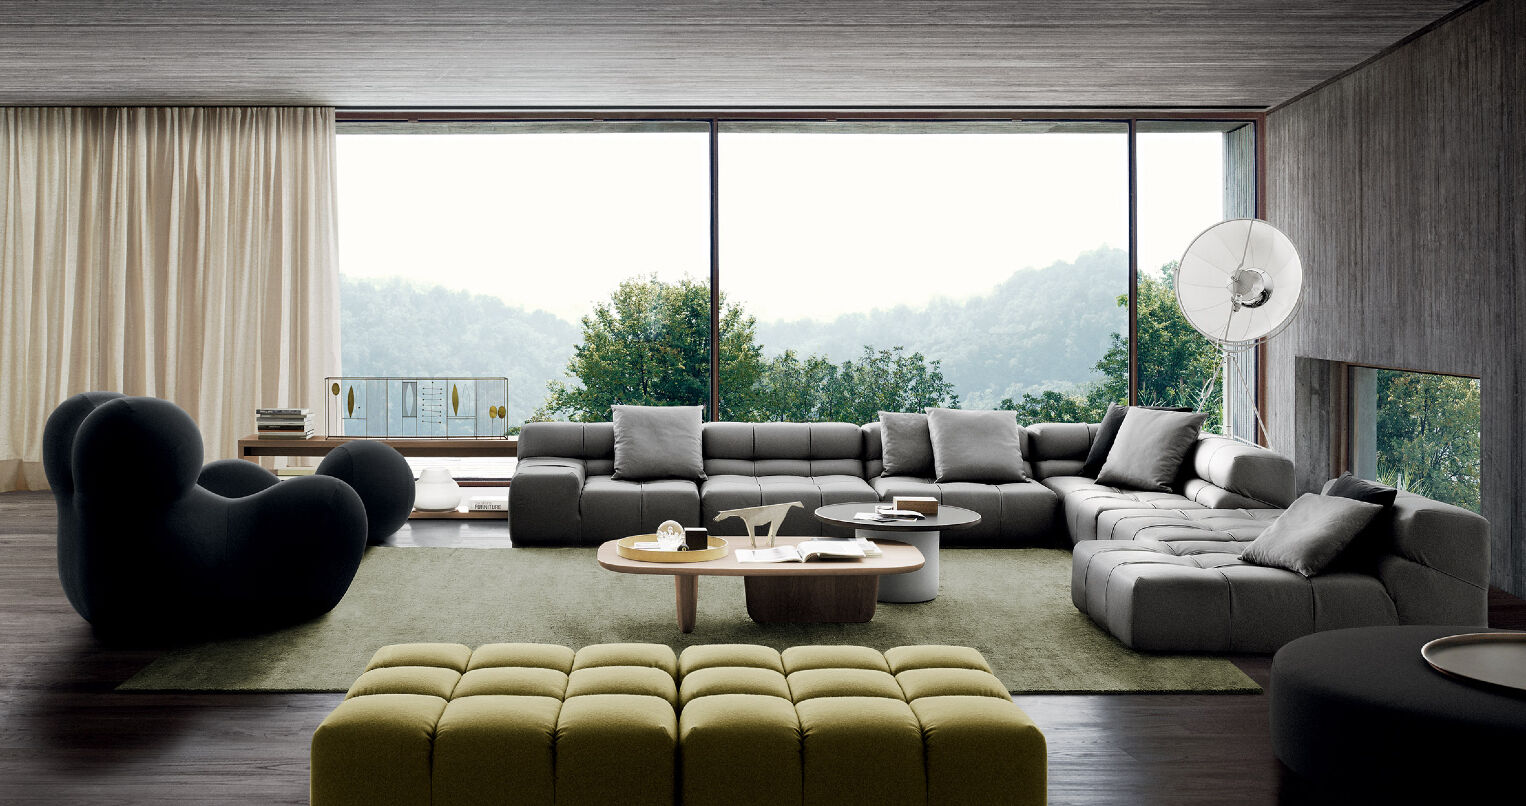 Living room with B&B Italia products: Serie Up armchair, Tufty-time sofas in different fabrics, tobi-ishi coffee table